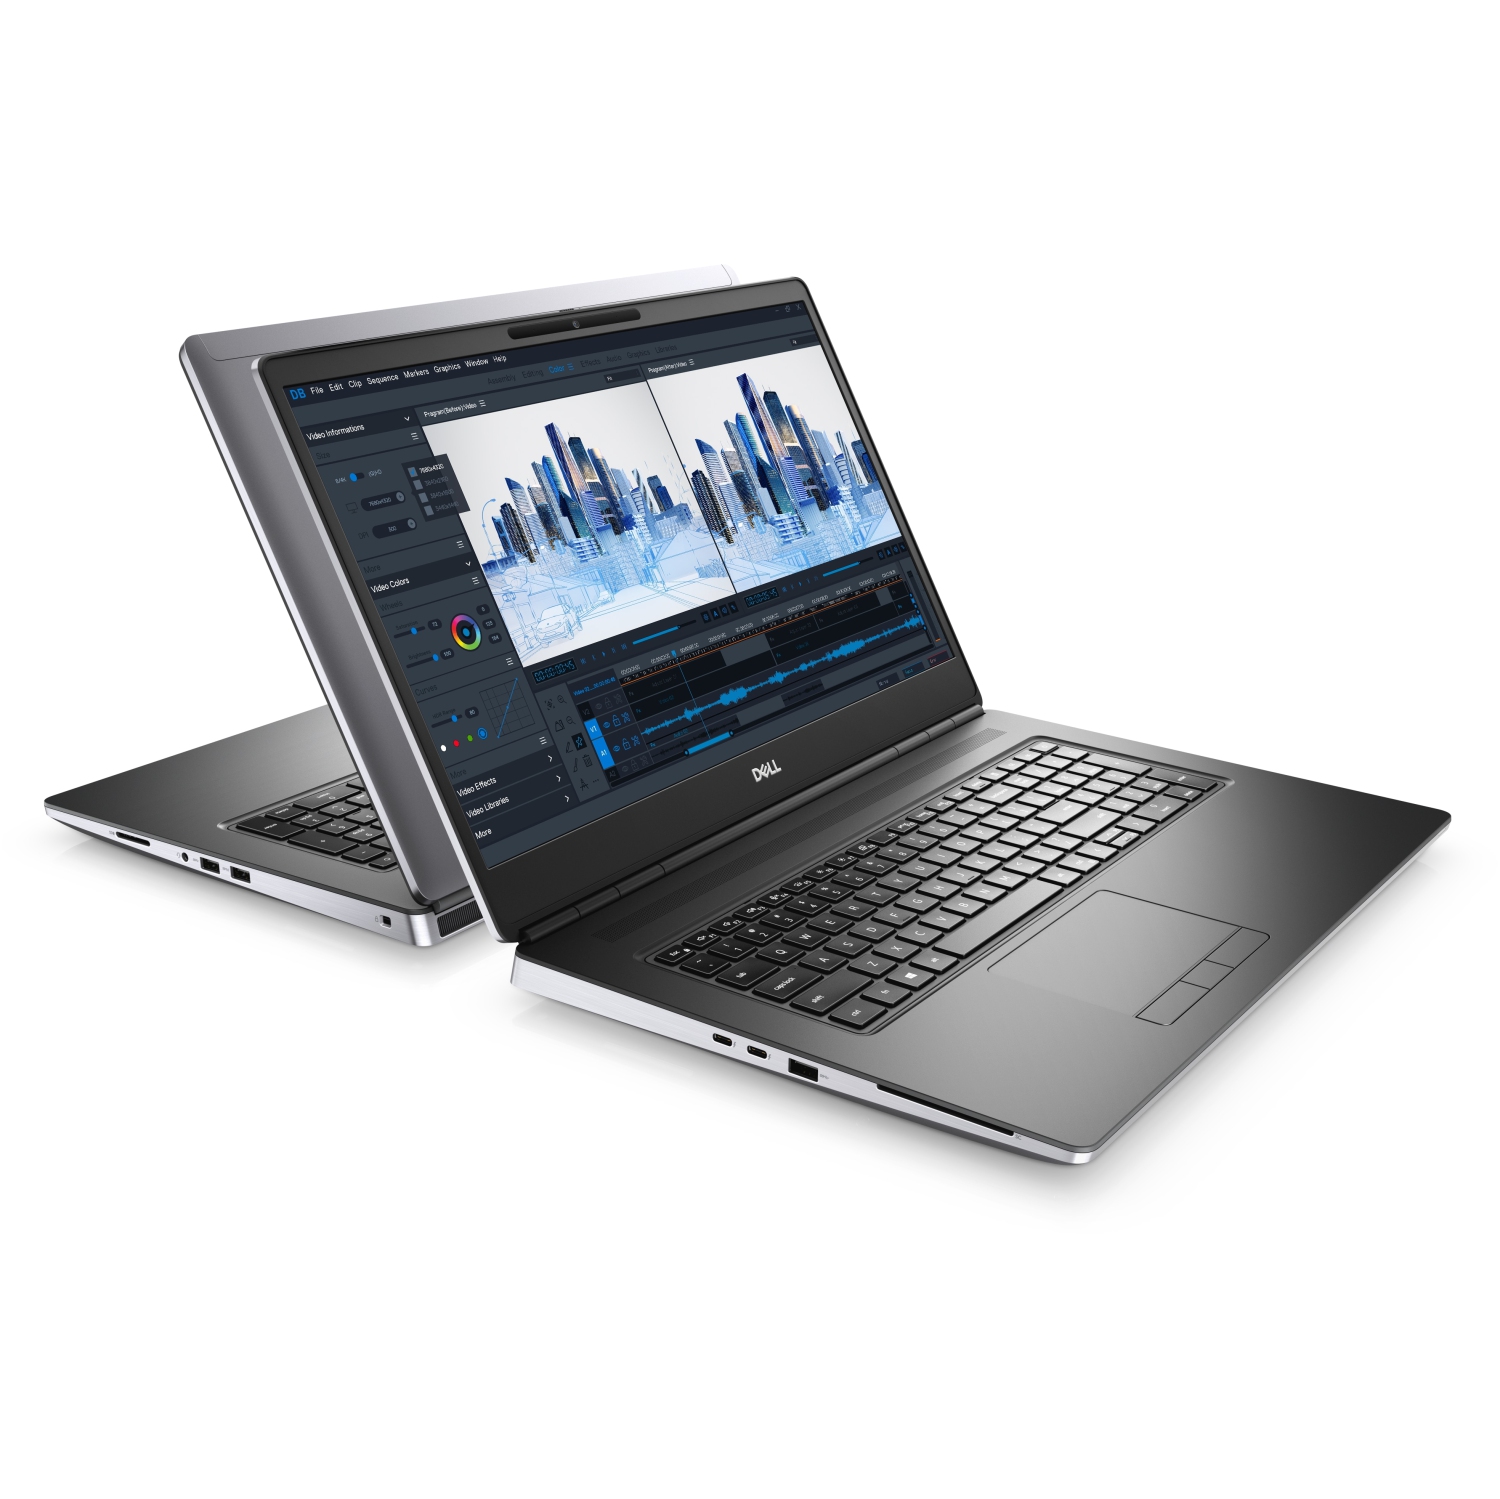 Refurbished (Excellent) - Dell Precision 7000 7760 Workstation Laptop (2021), 17.3" FHD, Core i5, 512GB SSD, 64GB RAM, RTX A5000, 4.6 GHz, 11th Gen CPU Certified